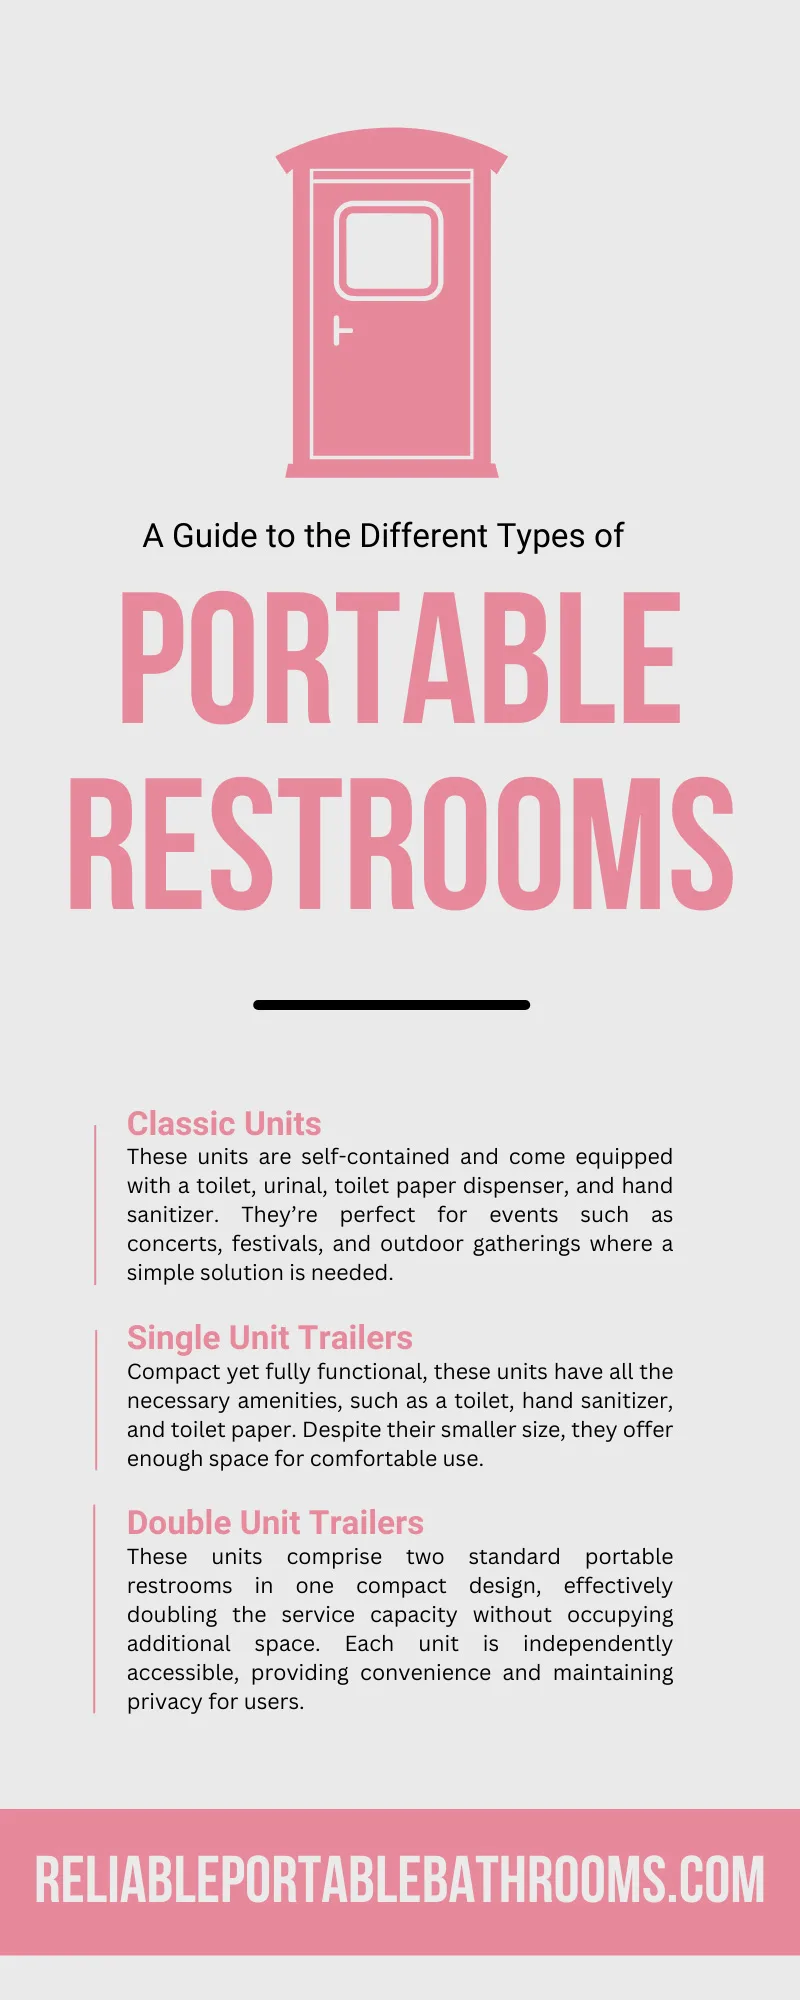 A Guide to the Different Types of Portable Restrooms